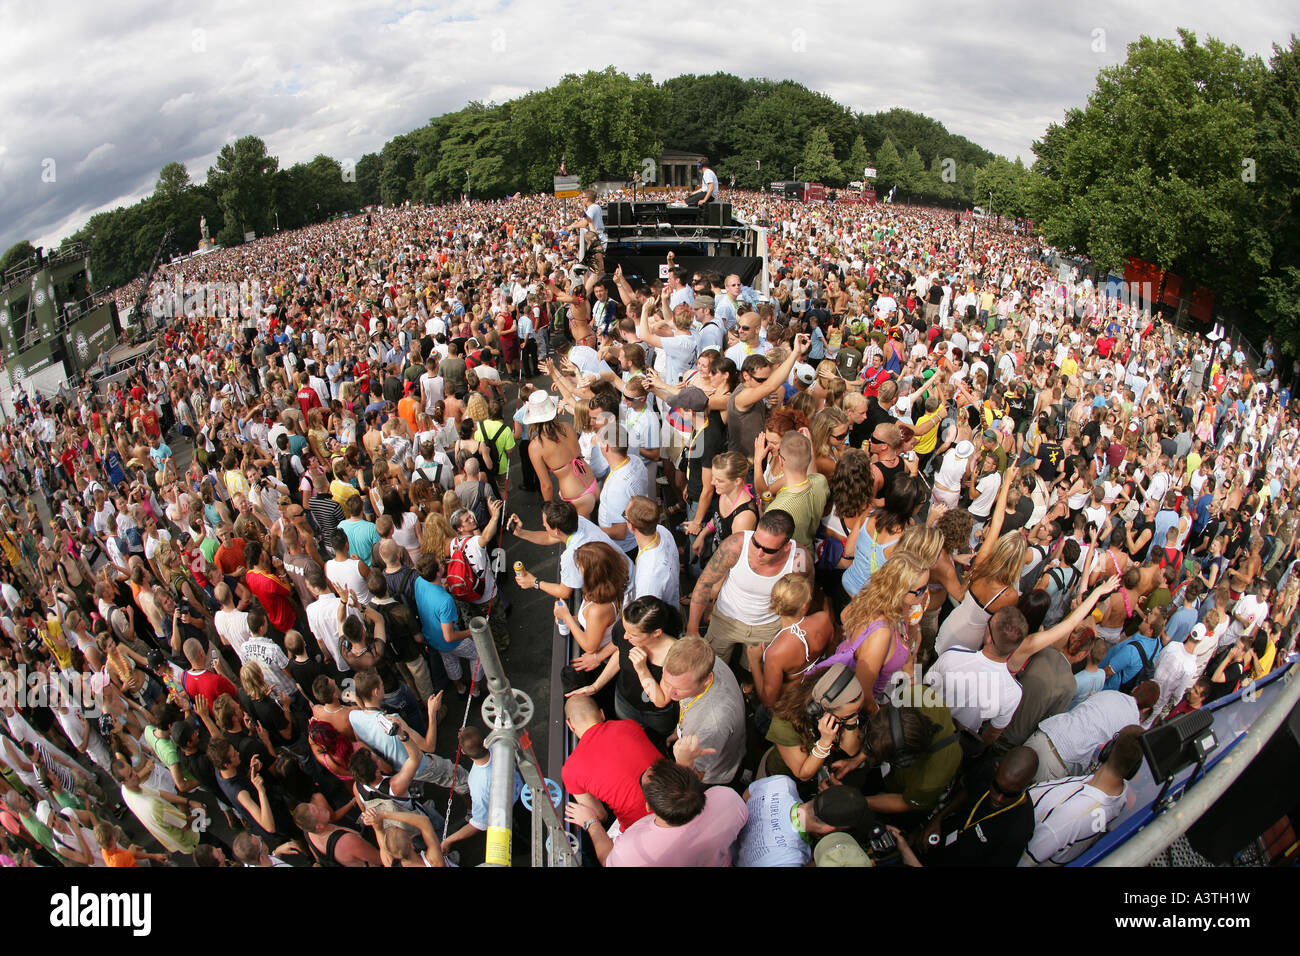 Young people dancing during the Loveparade 2006 in Berlin, Germany Stock Photo